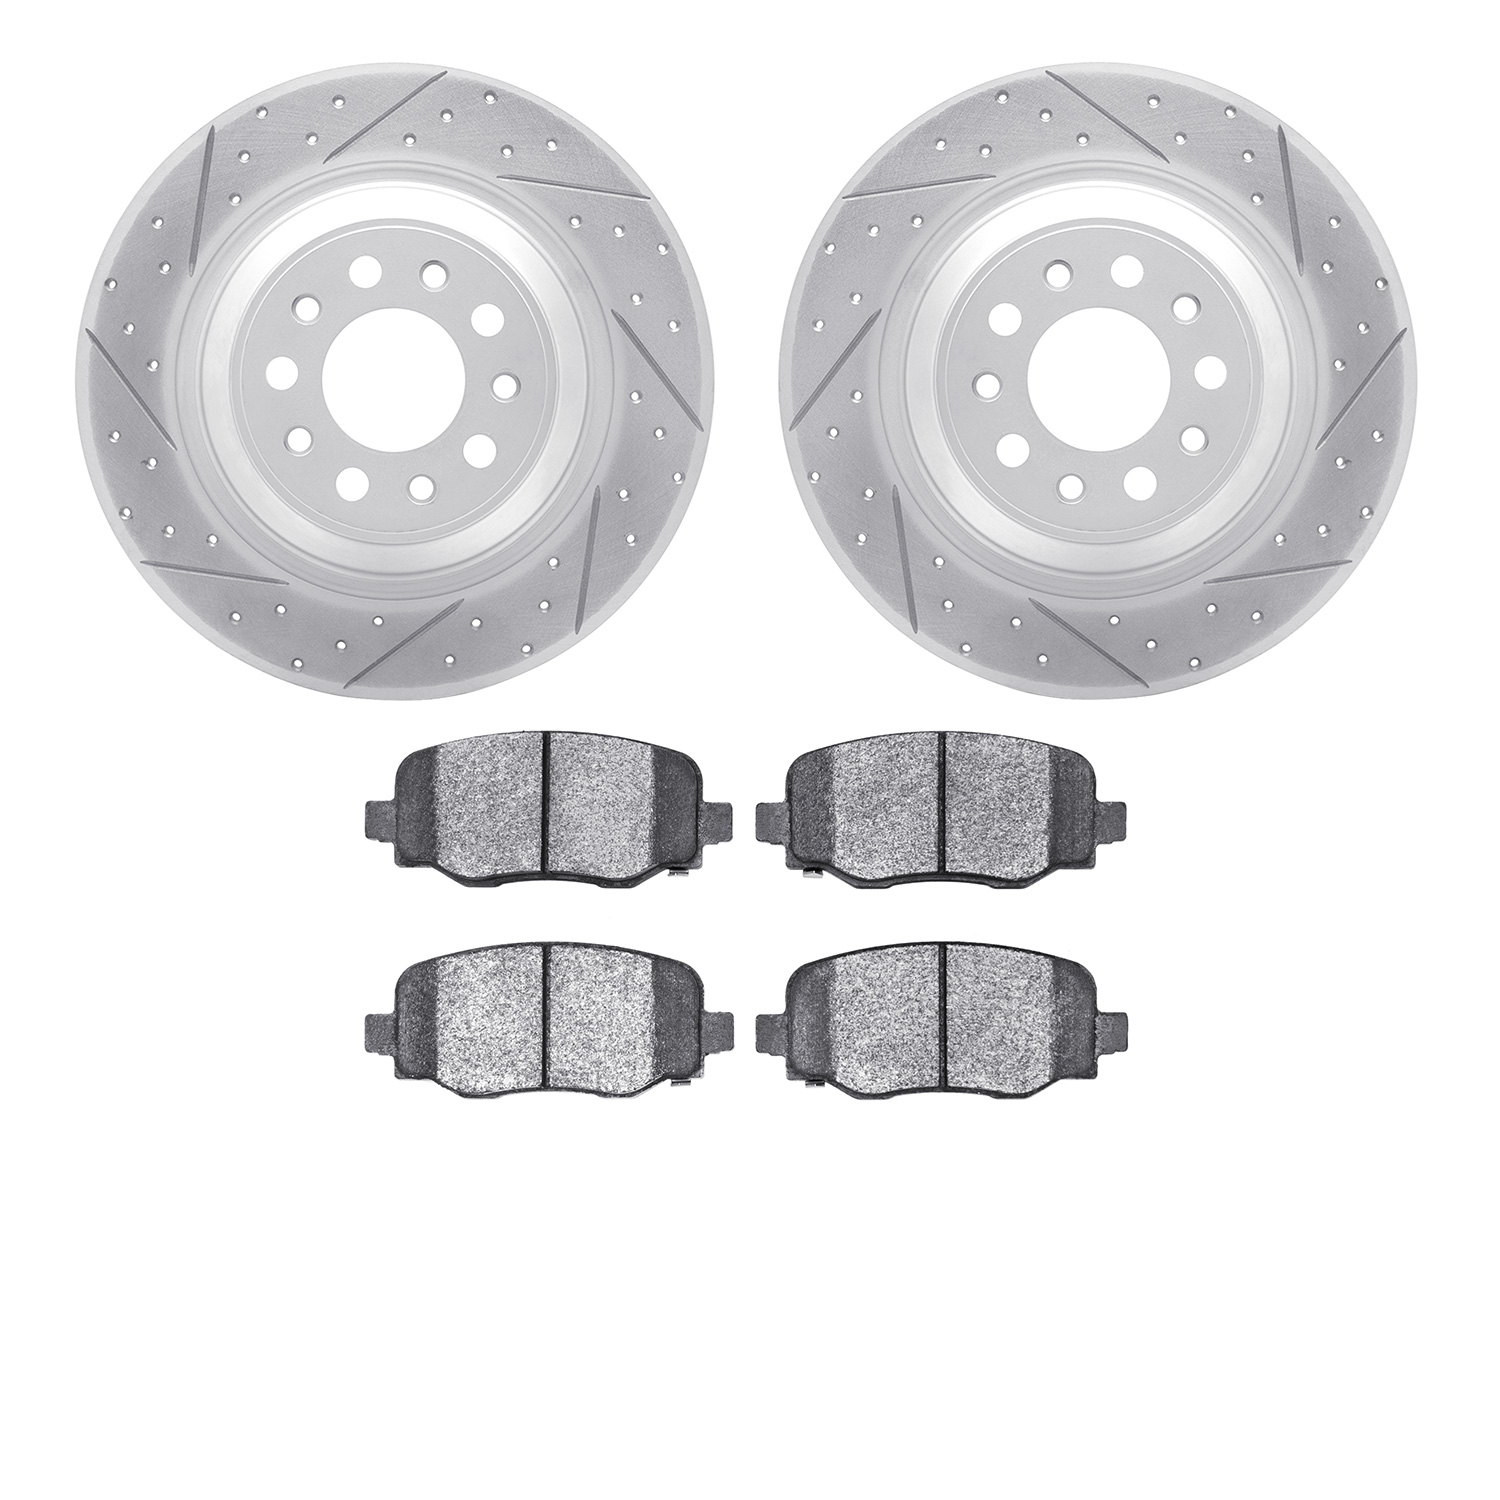 2402-42011 Geoperformance Drilled/Slotted Brake Rotors with Ultimate-Duty Brake Pads Kit, Fits Select Mopar, Position: Rear